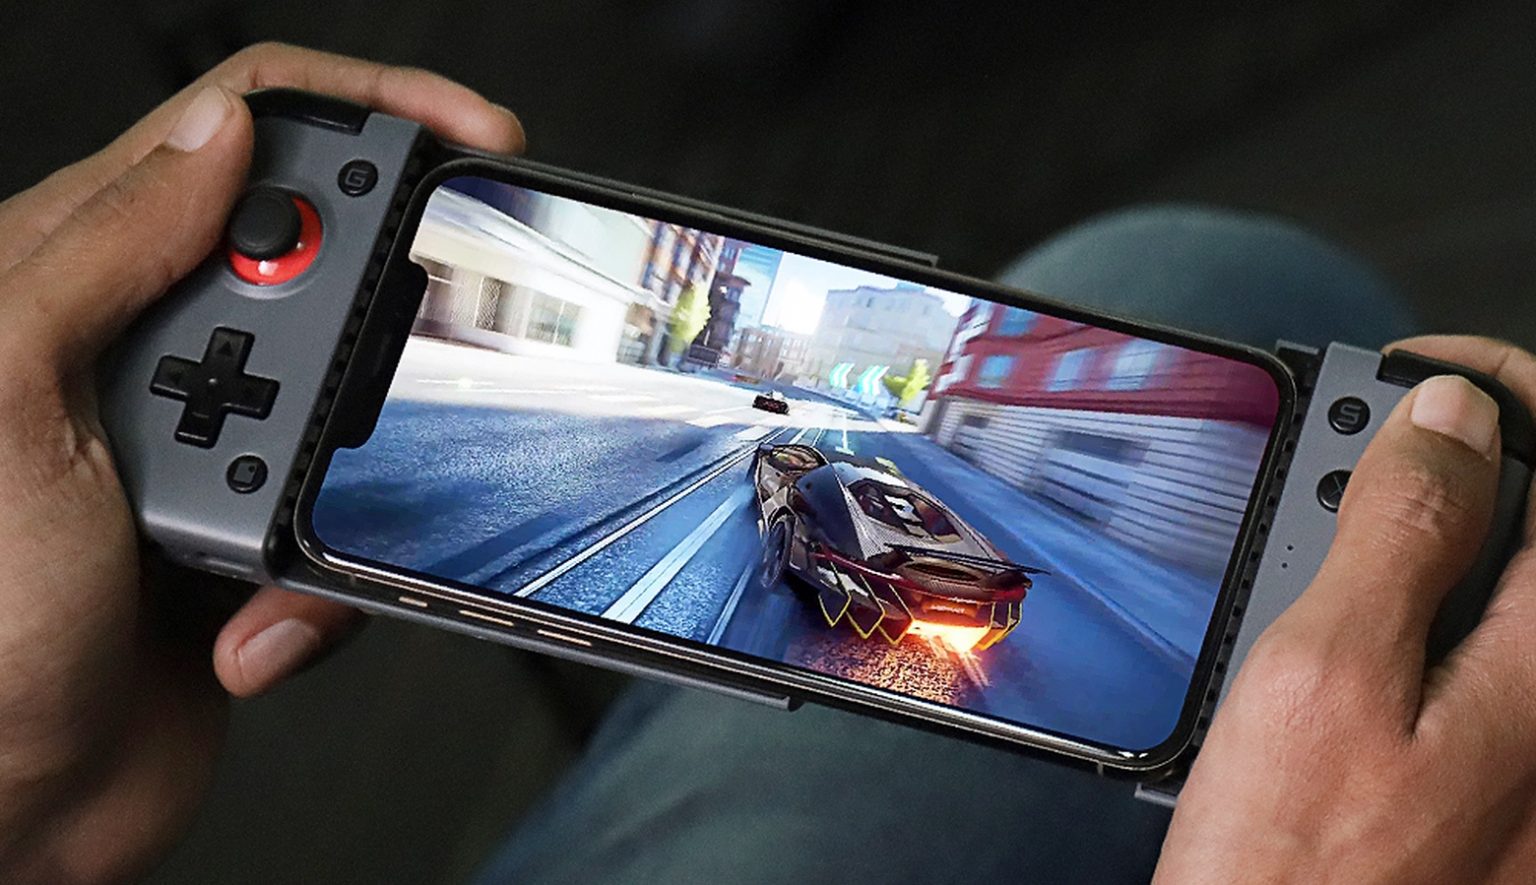 GameSir X2 Bluetooth Mobile Gaming Controller works with iPhone and Android